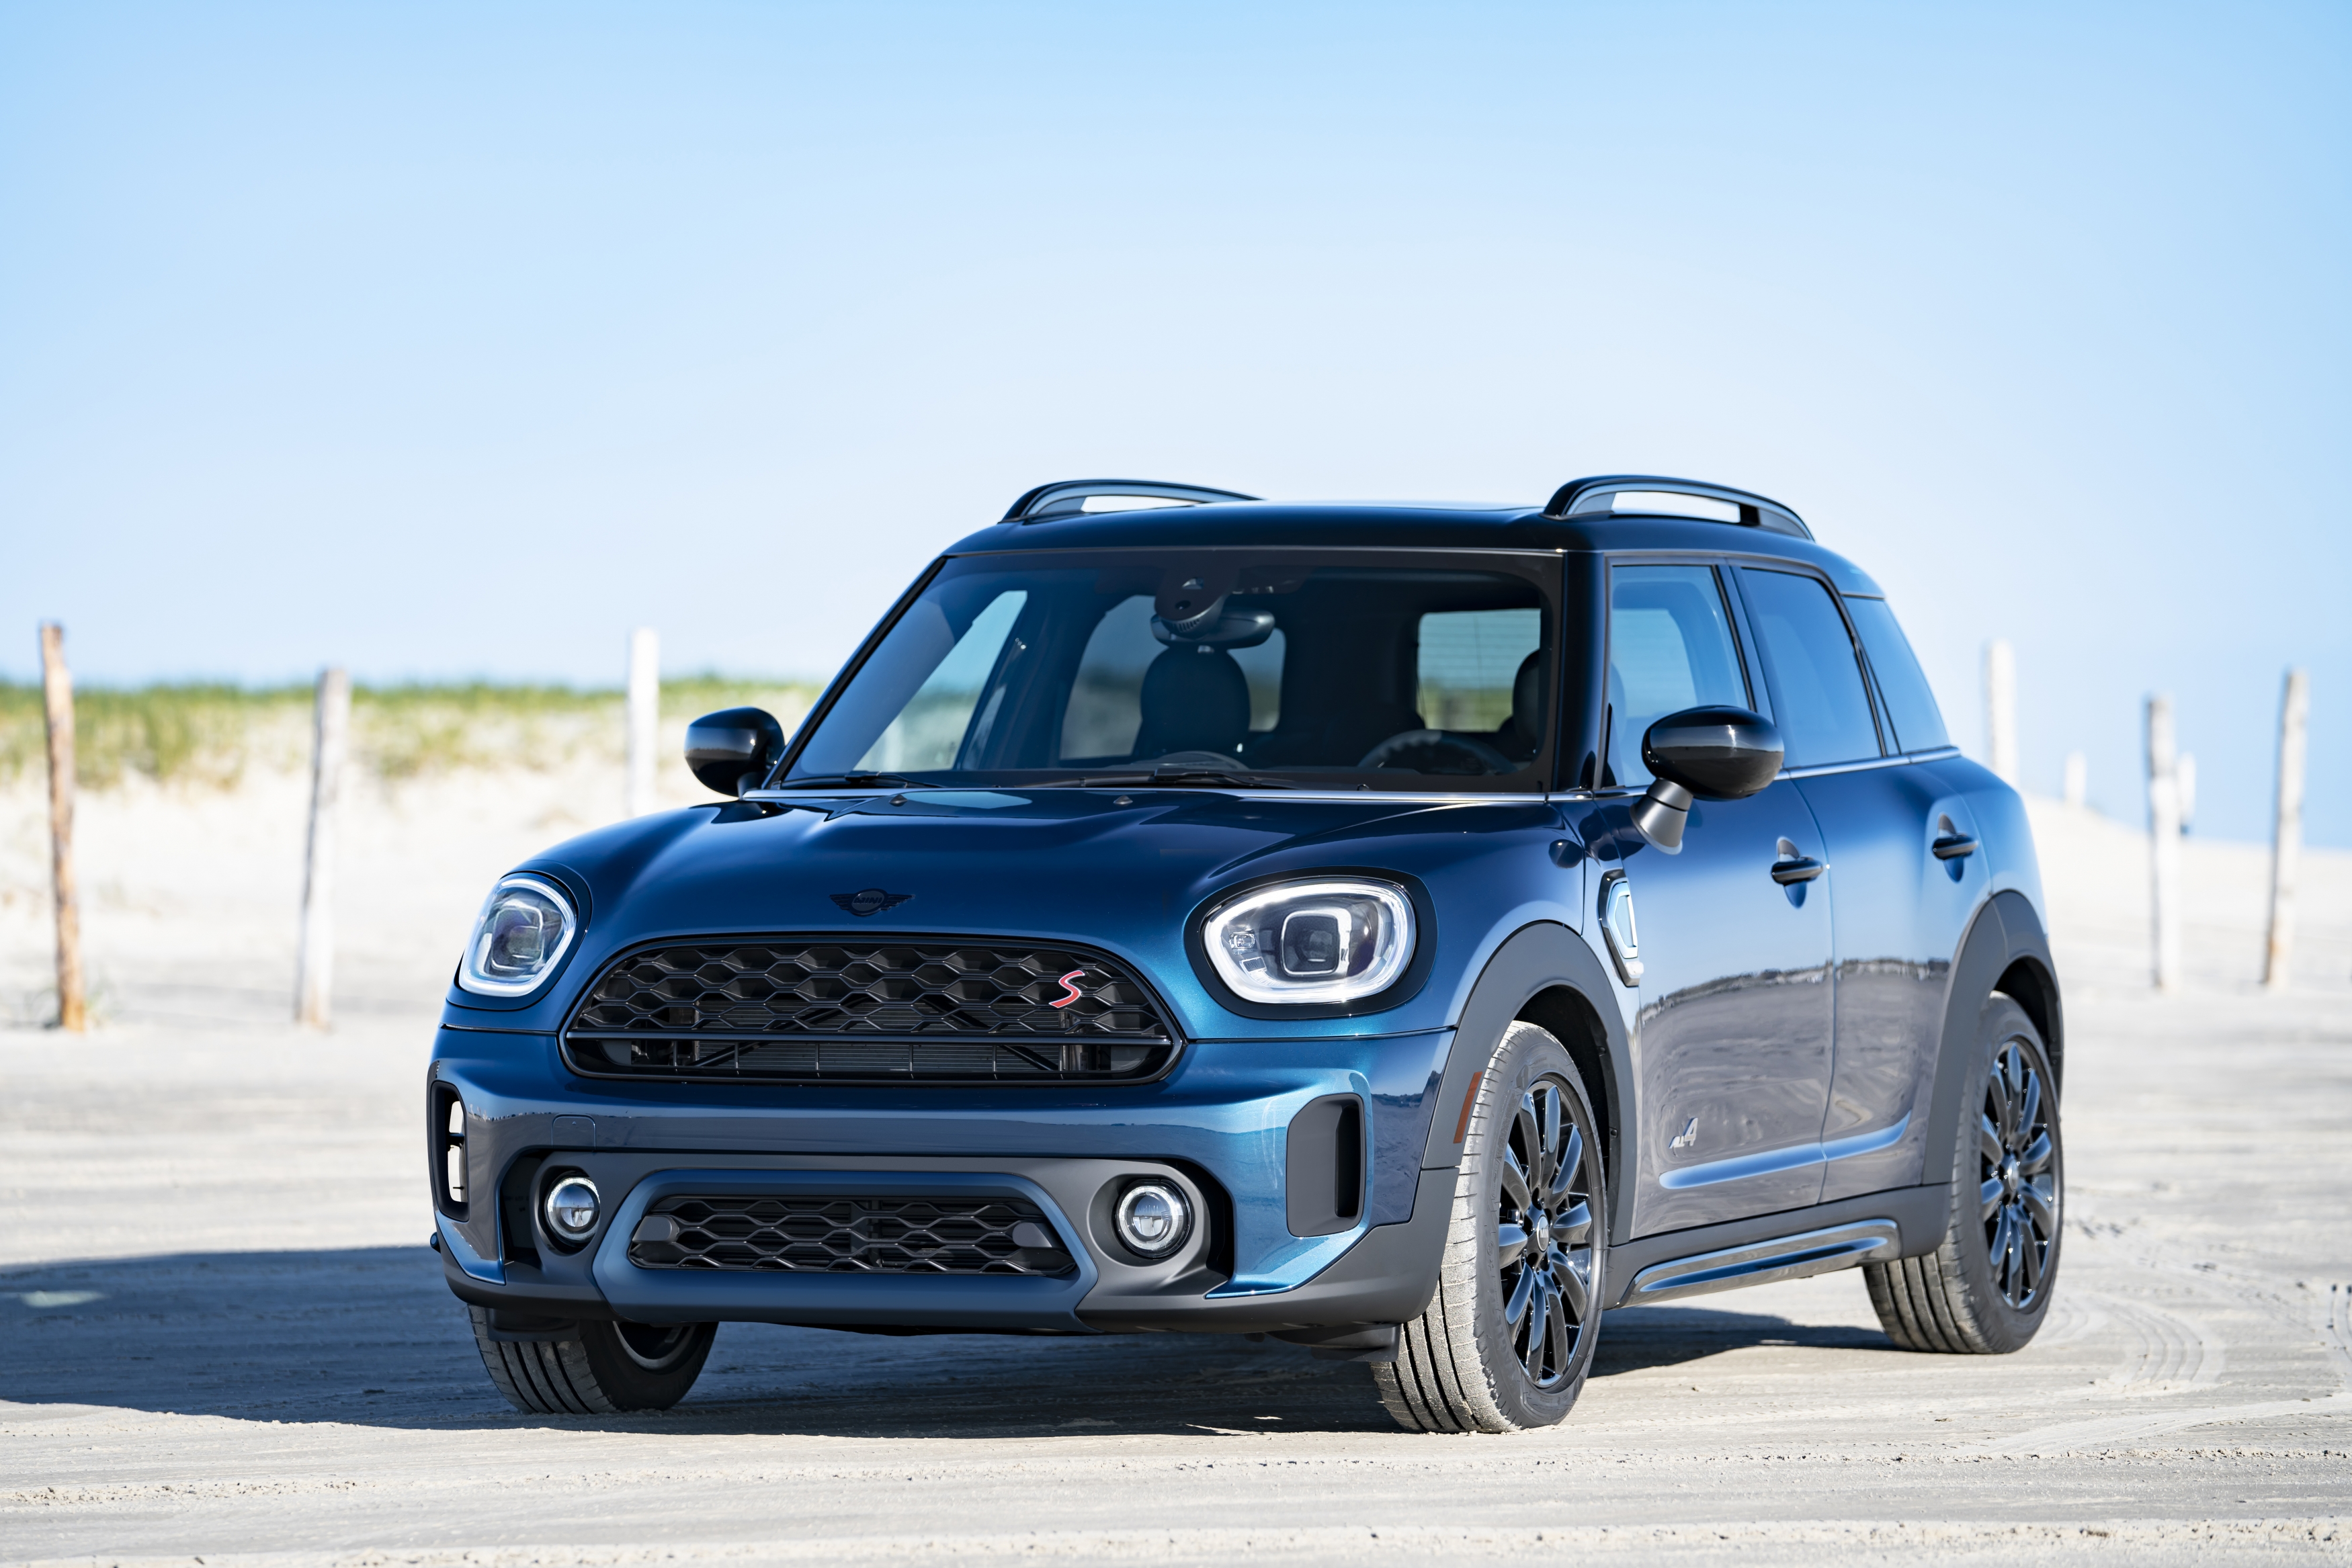 MINI Countryman Boardwalk Edition Launches In Time for Summer